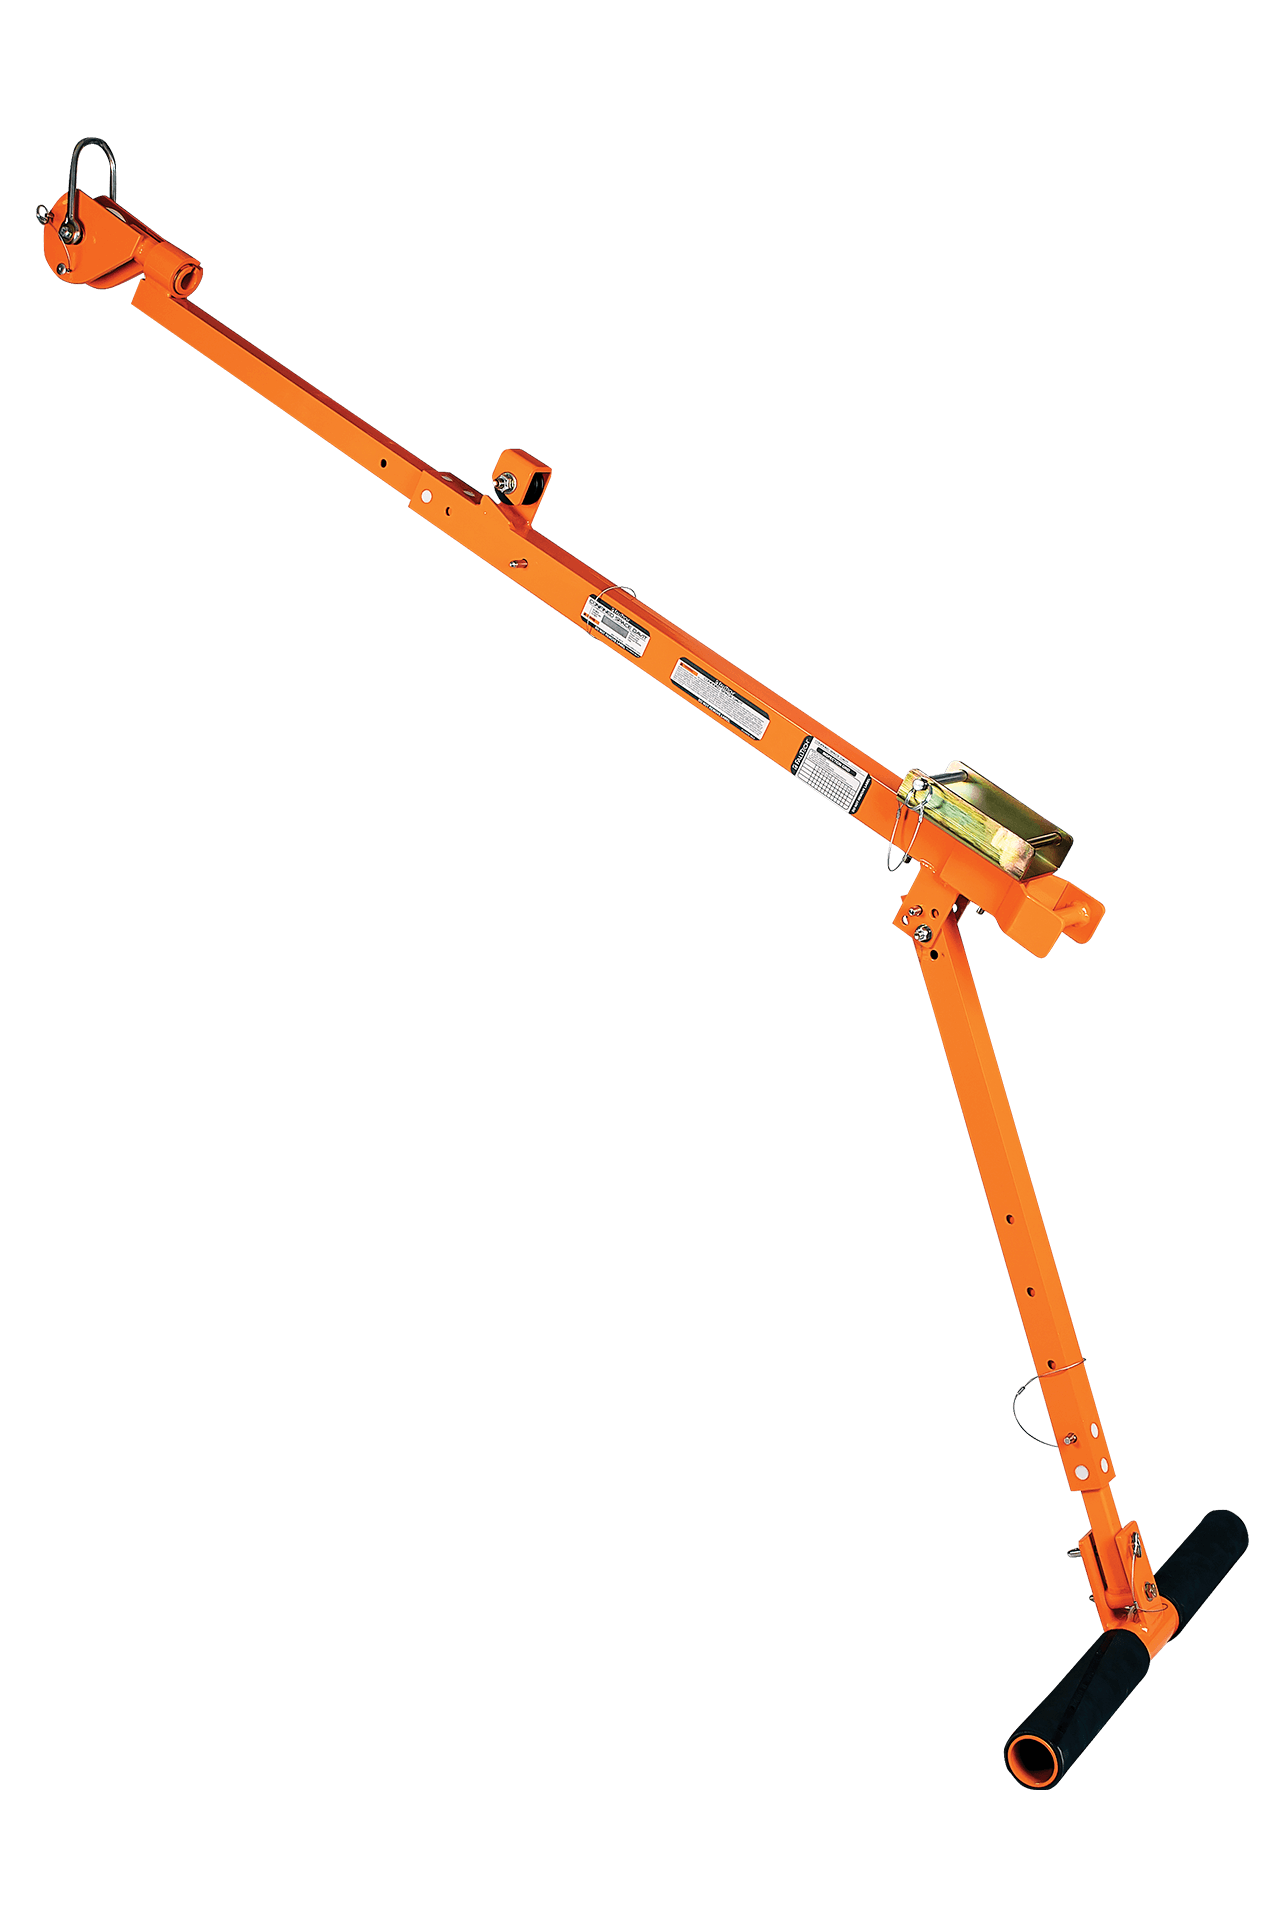 Adjustable Confined Space Entry and Retrieval Pole Hoist